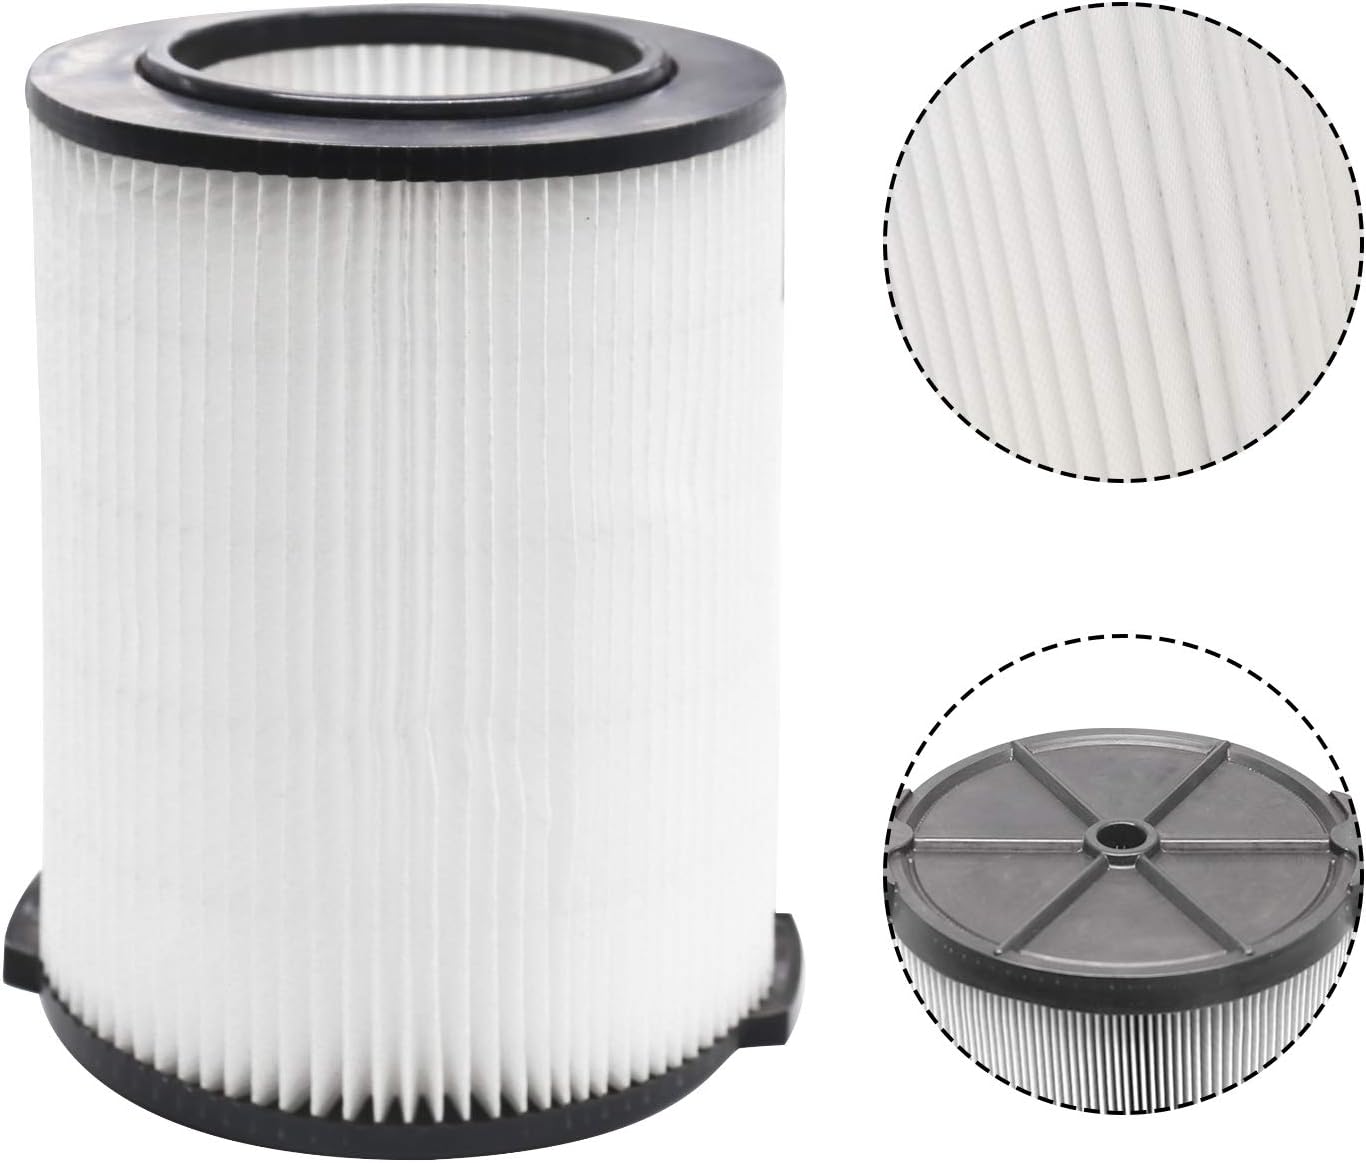 GIBTOOL VF4000 Wet/Dry Vac Filter Replacement,Compatible with Ridgid 72947 Vacs 5-20 Gal Vac Also fits for Craftsman 17816, Husky 6-9 G